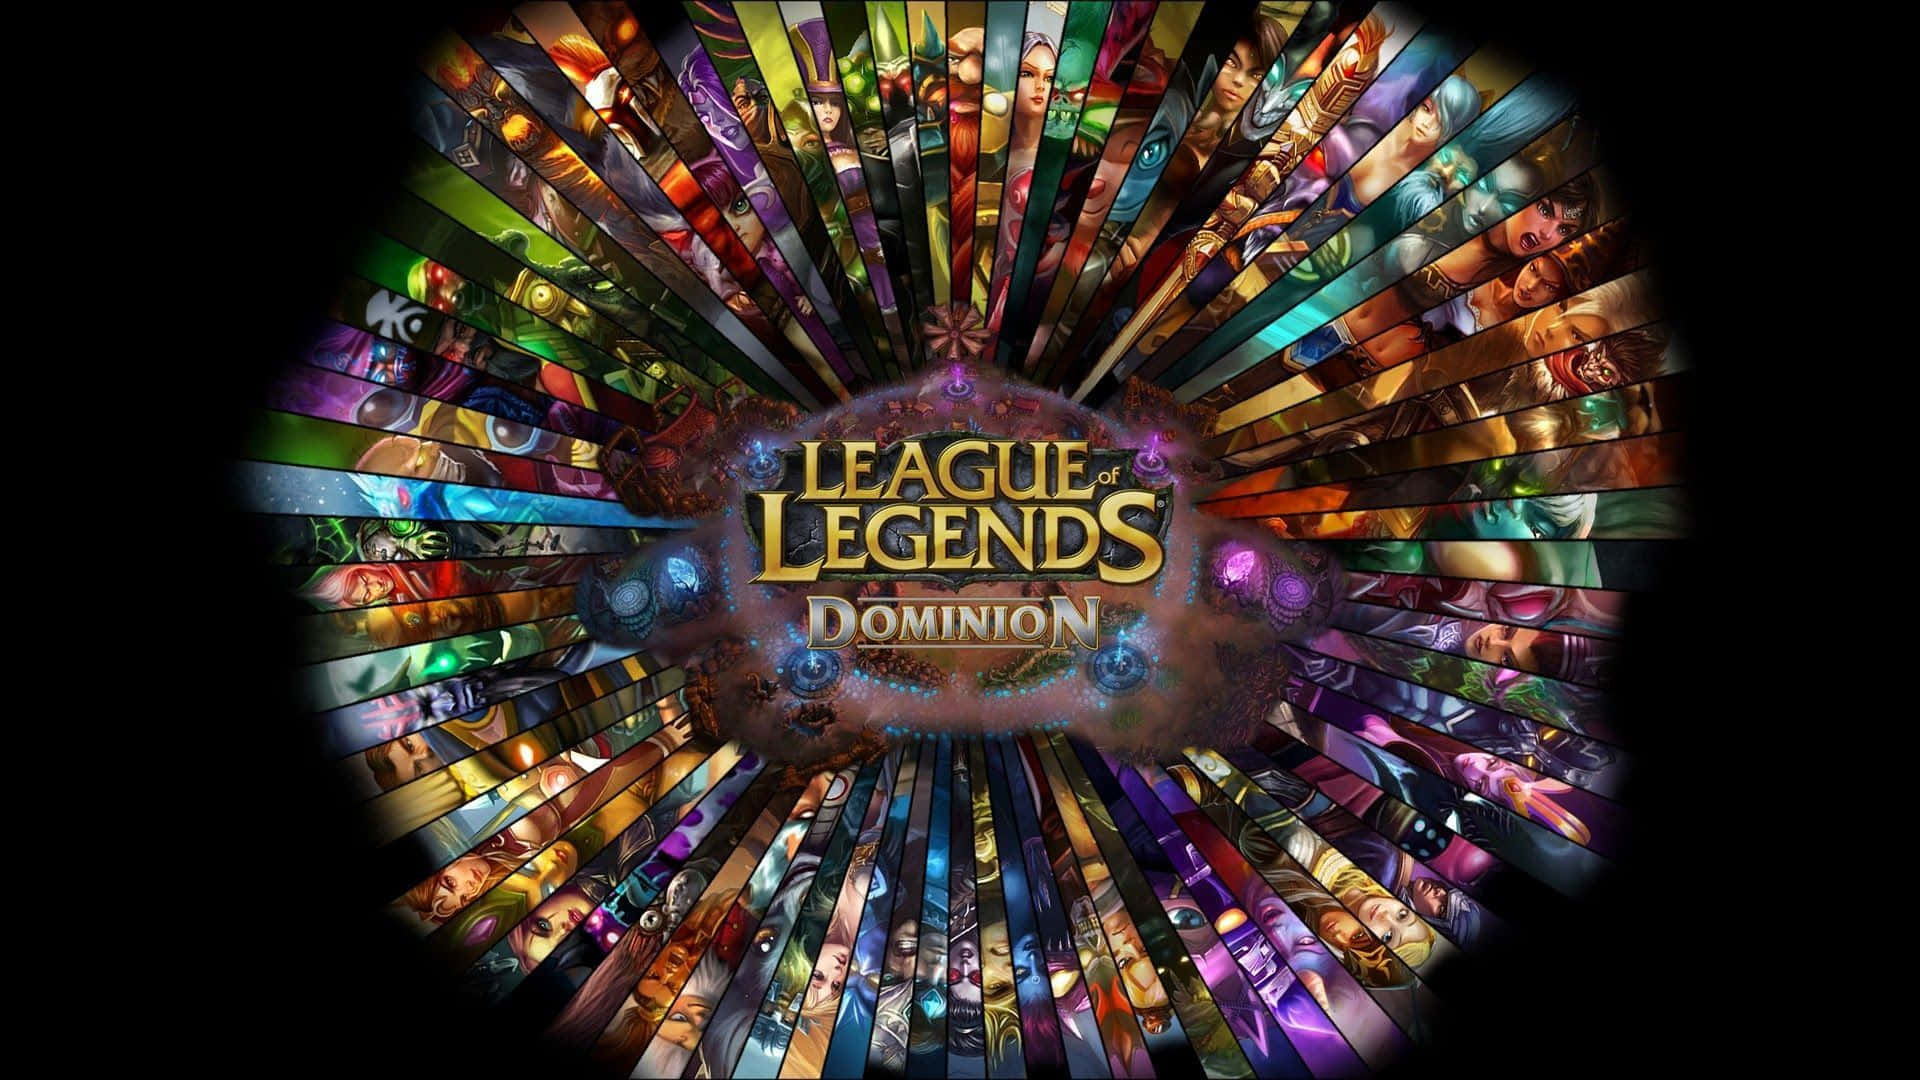 Enter the realm of Best League of Legends